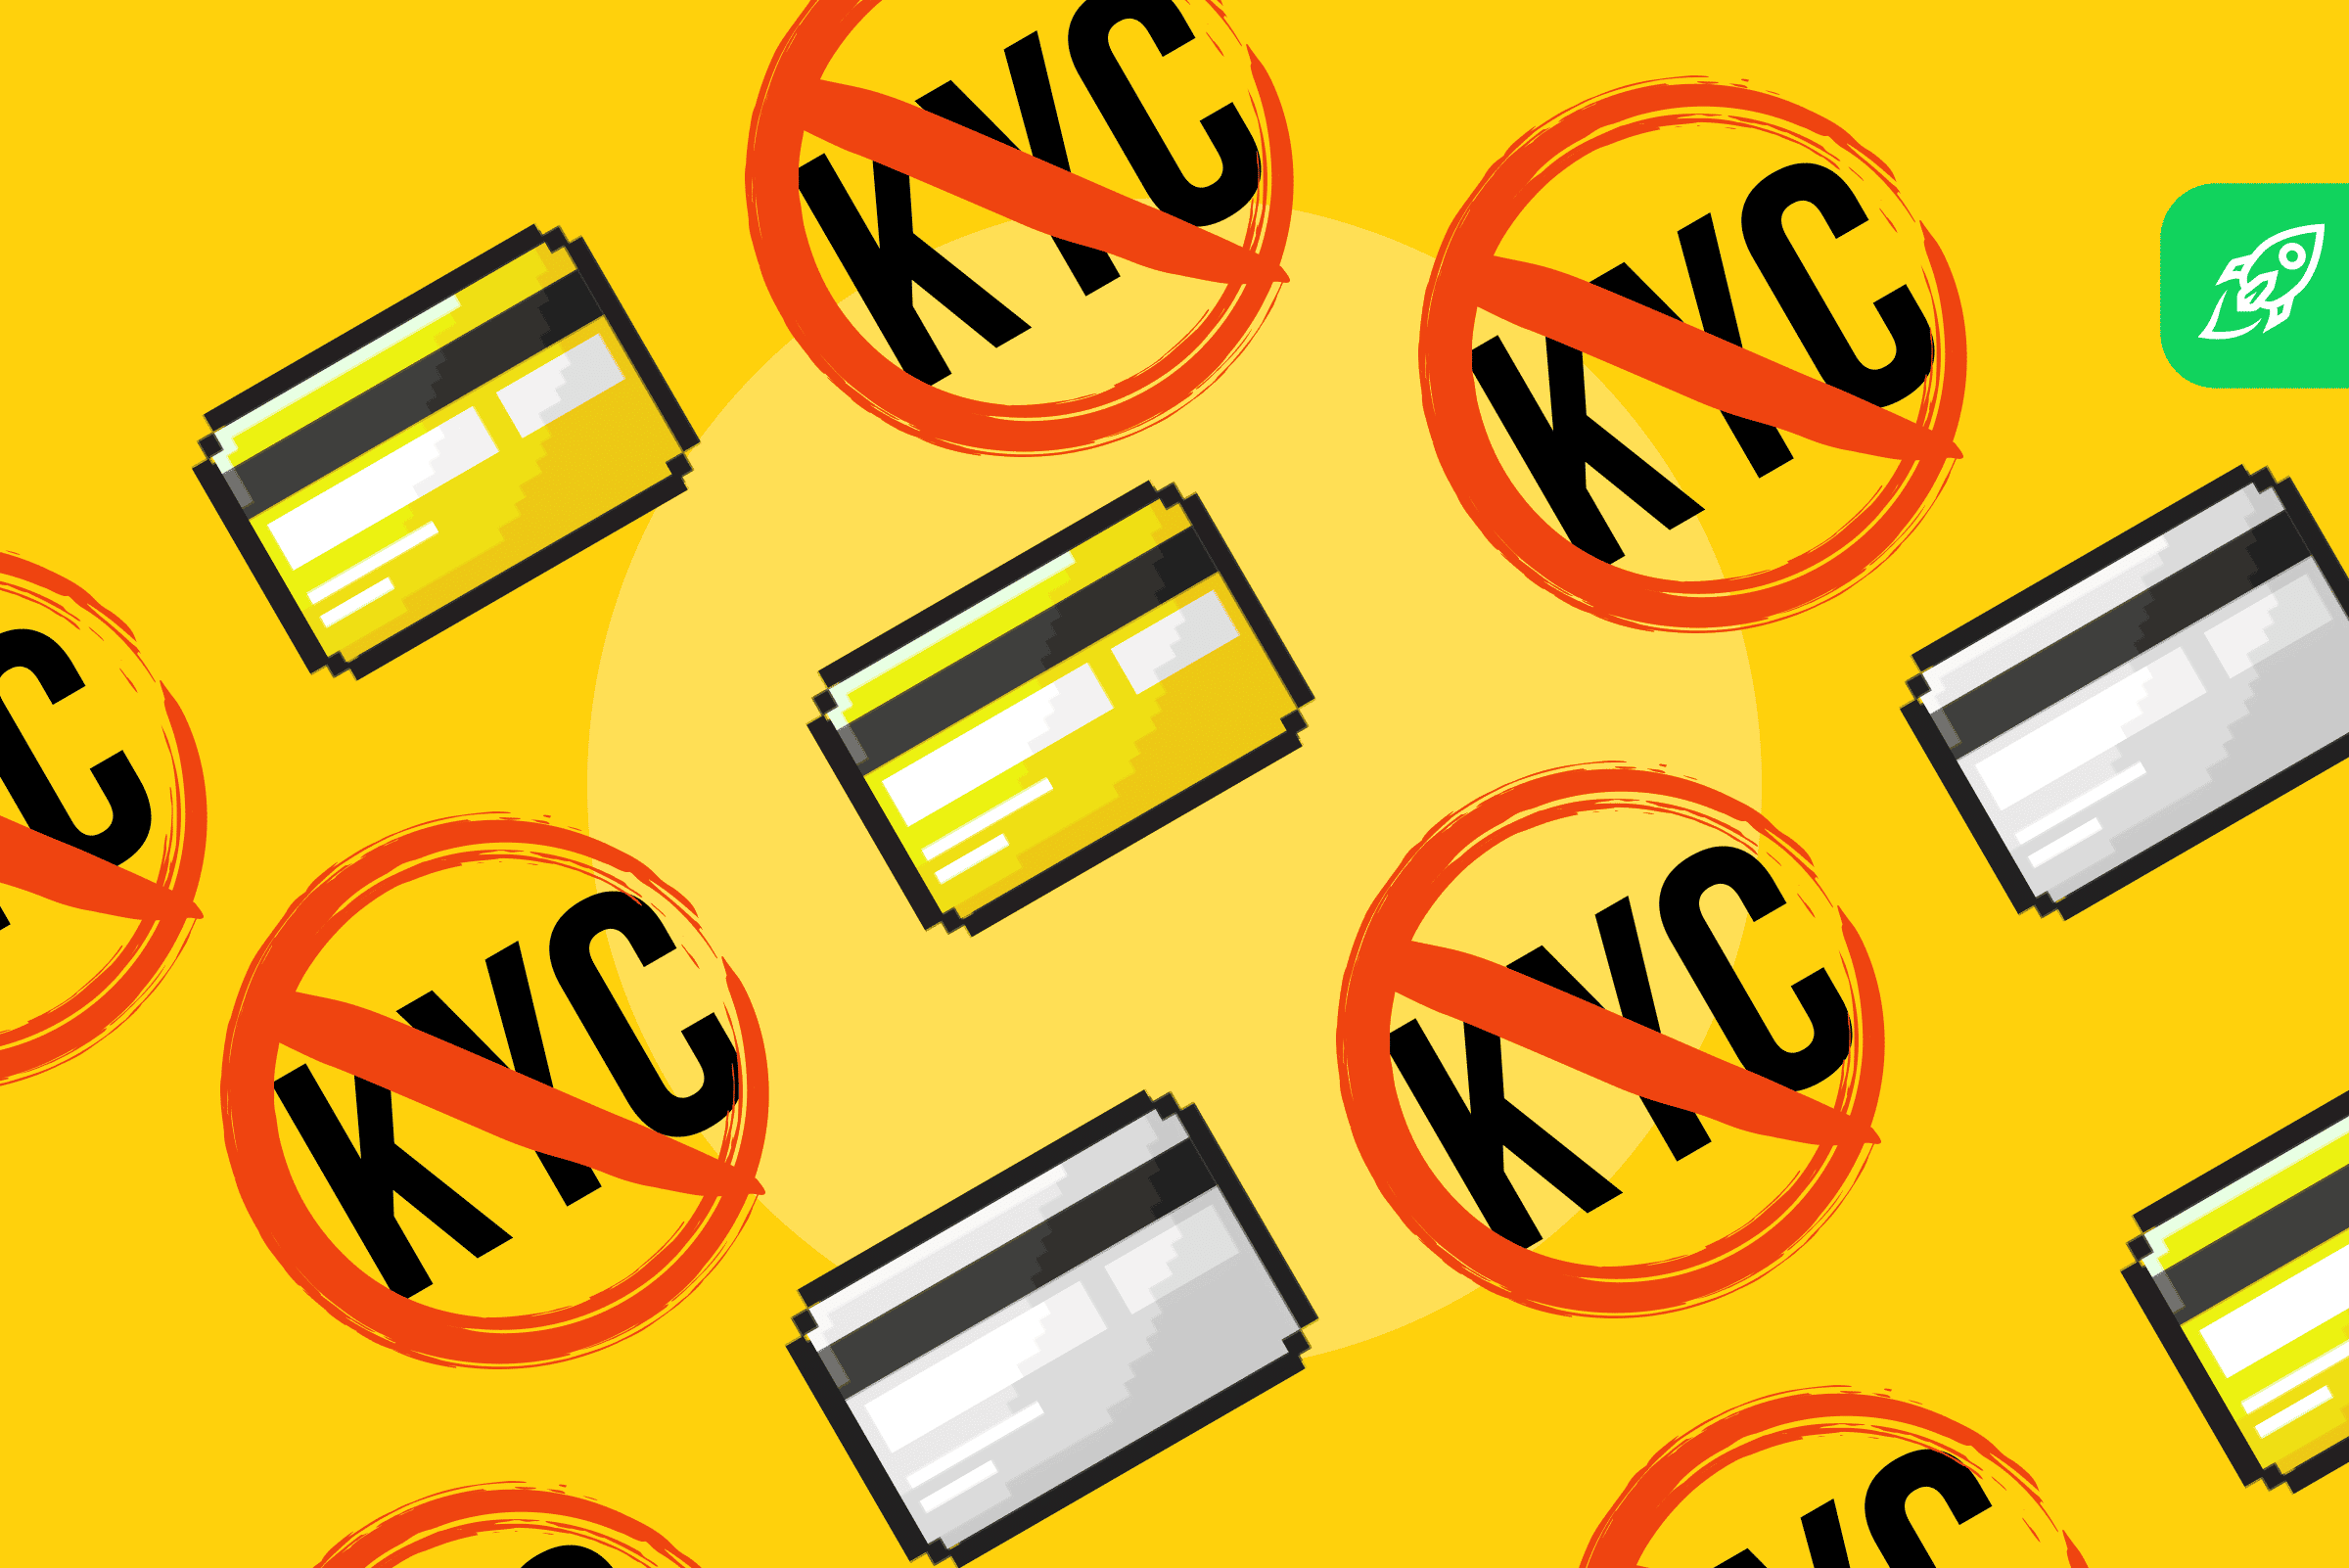 crypto credit card without kyc